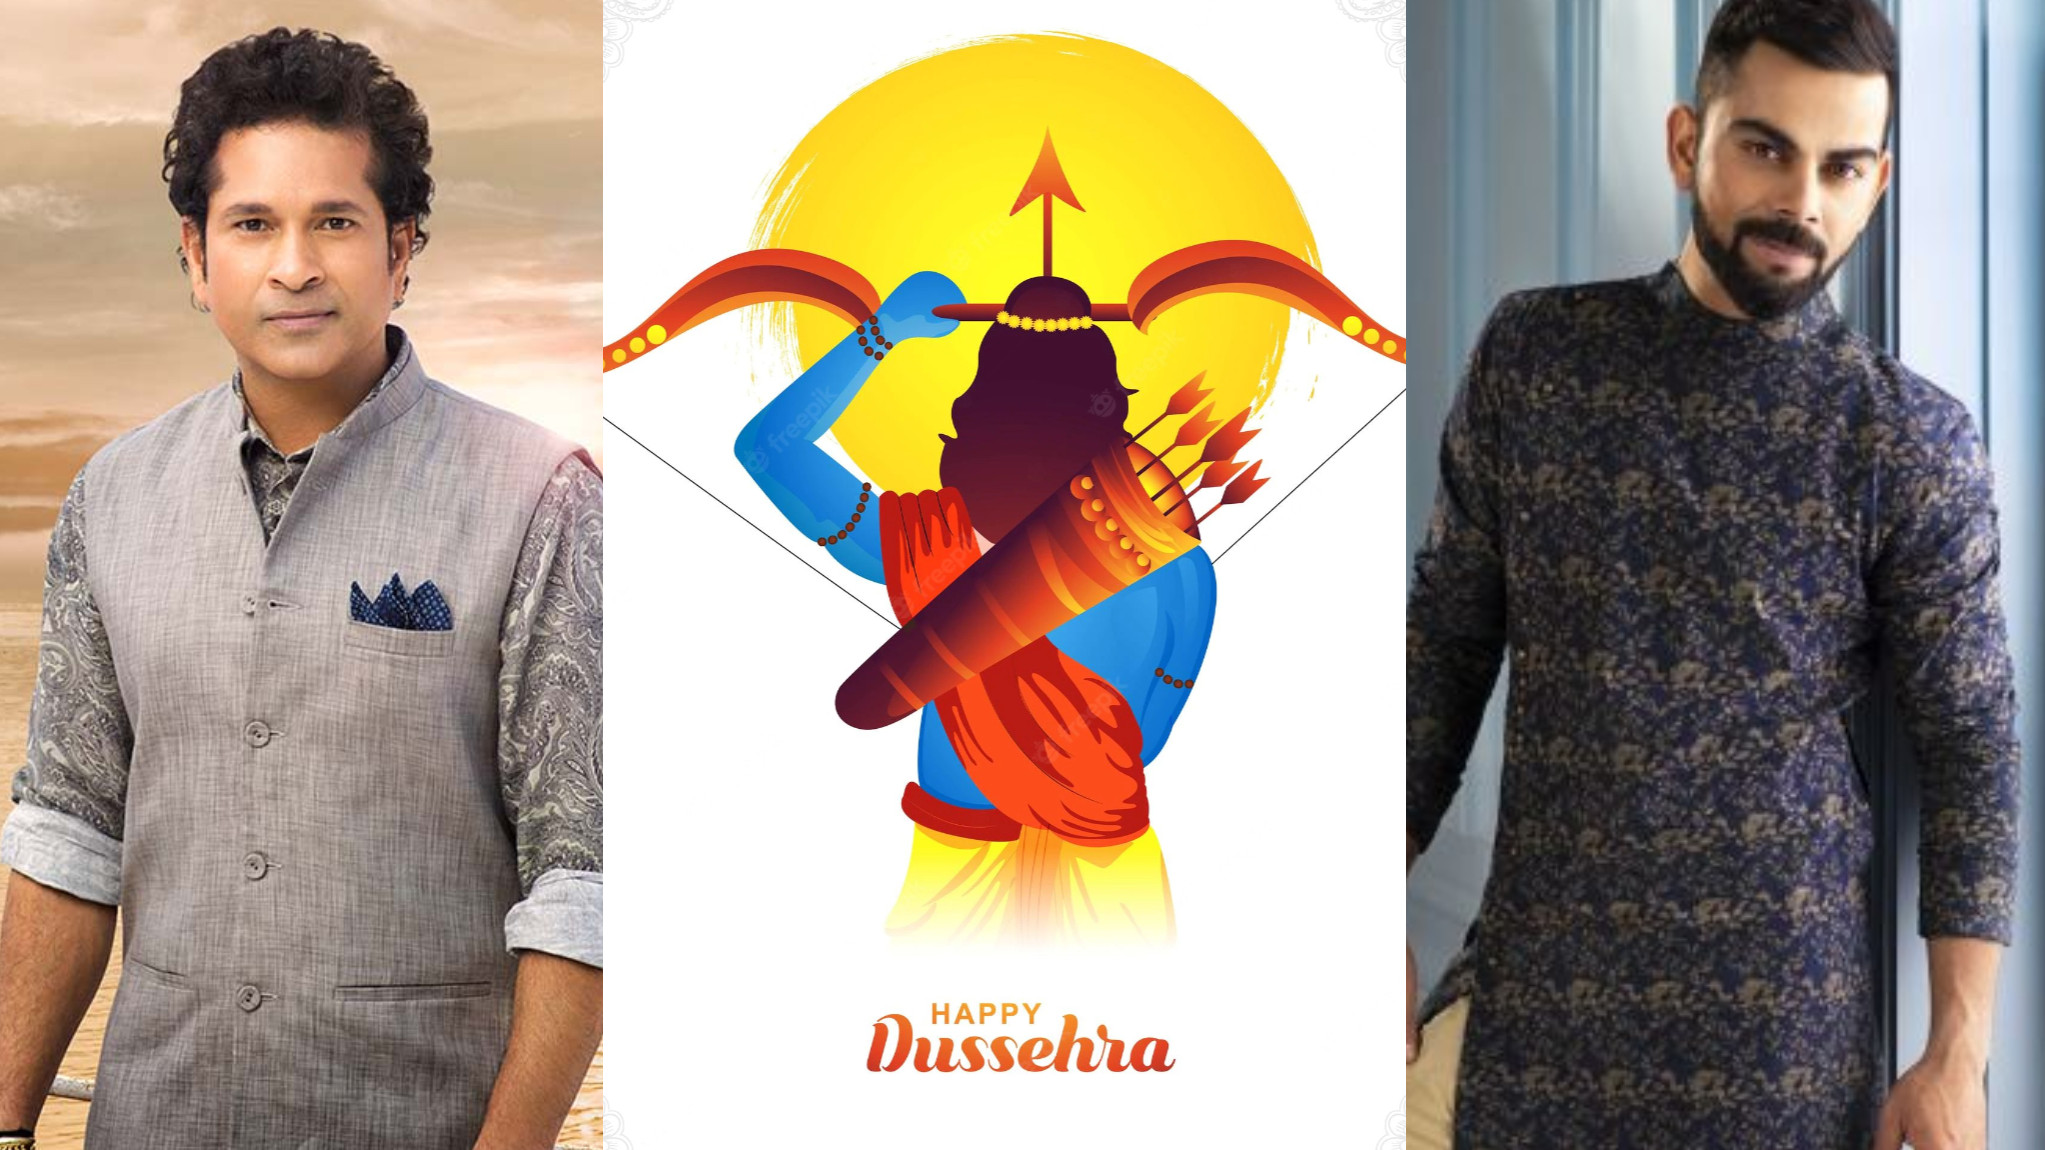 Indian cricket fraternity sends wishes to fans on occasion of Dussehra